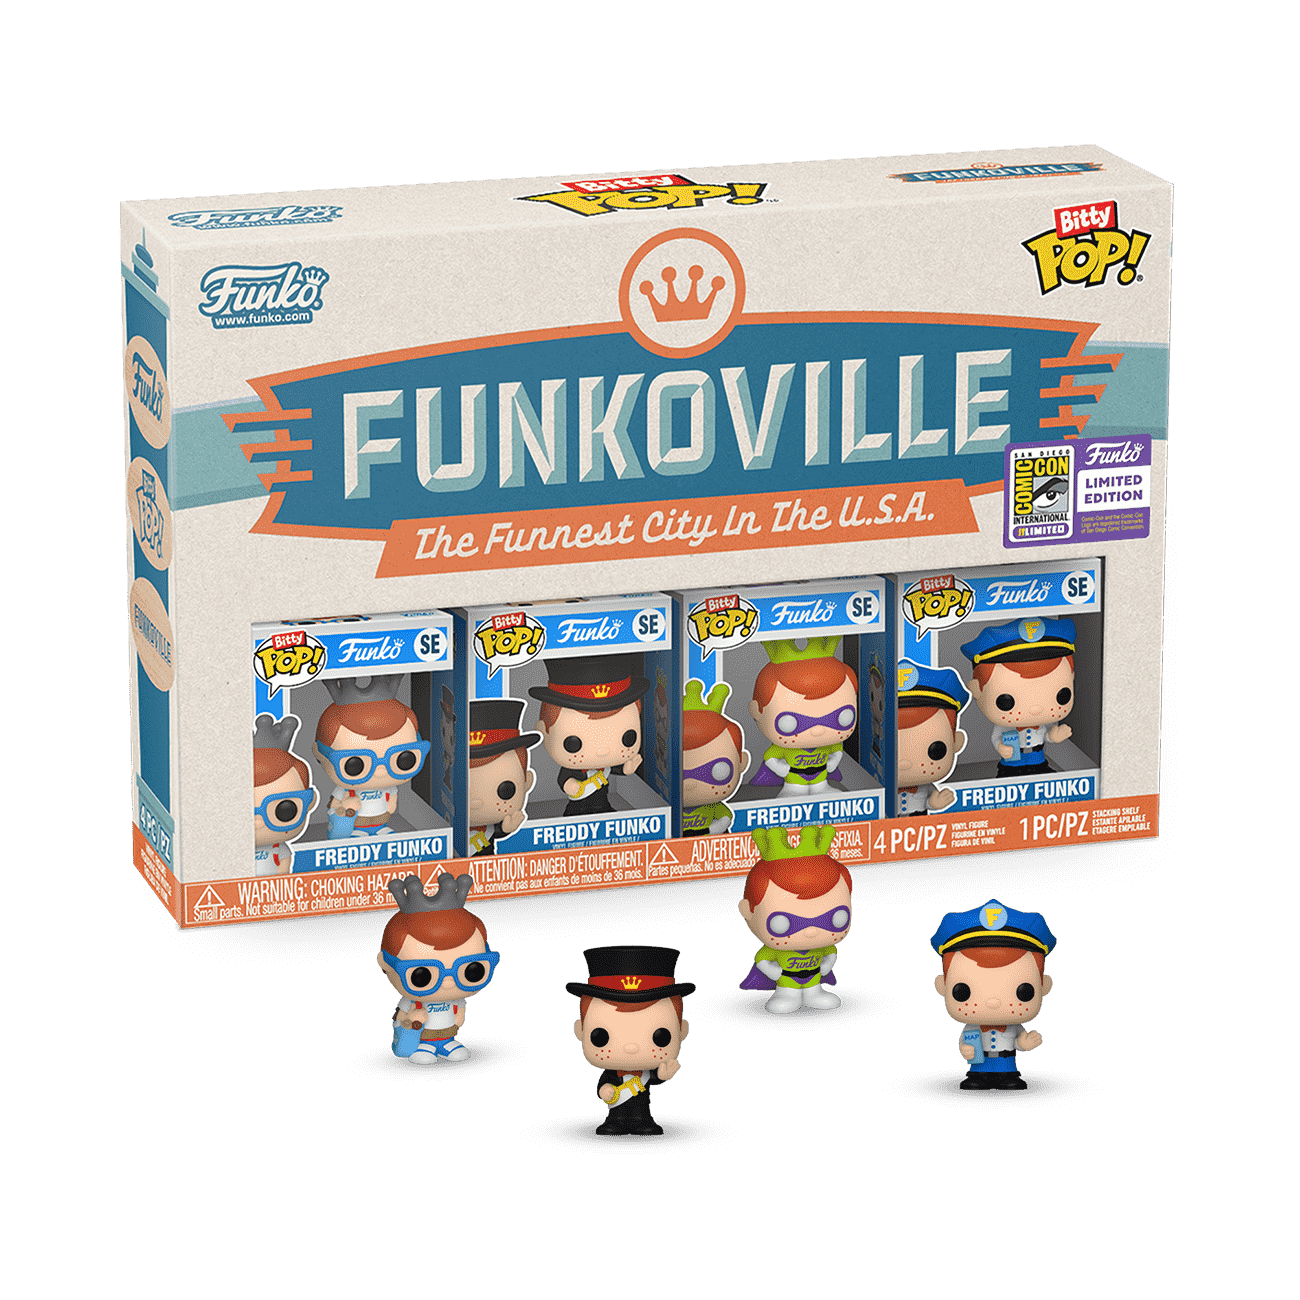 Buy Bitty Pop! Funkoville 4-Pack at Funko.